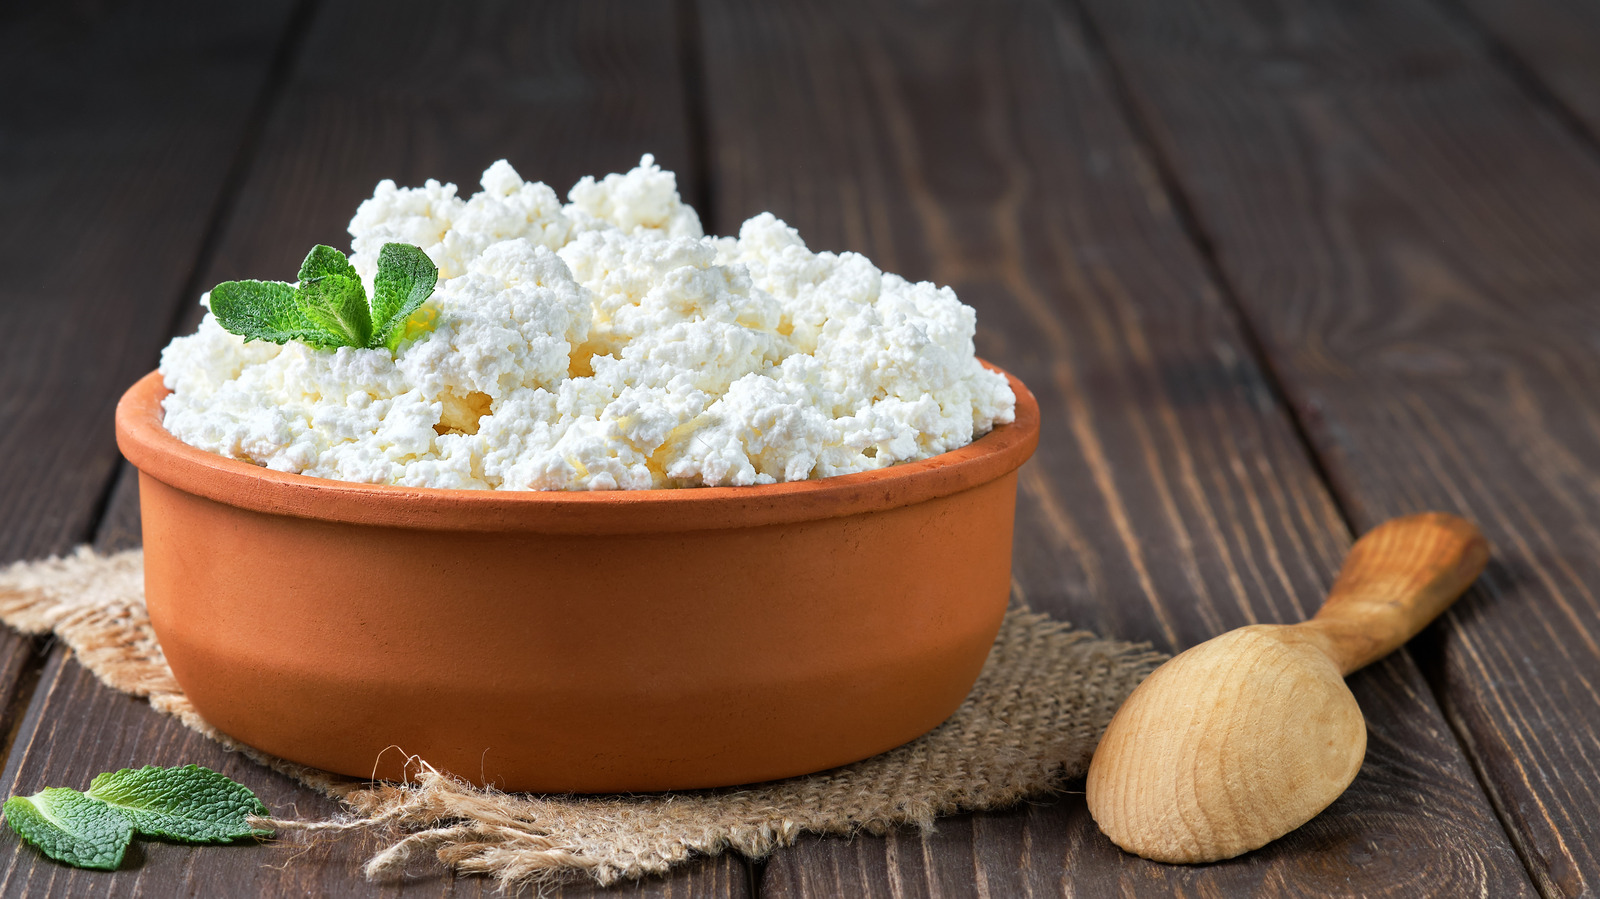 General Mills invests in cottage cheese | FDBusiness.com